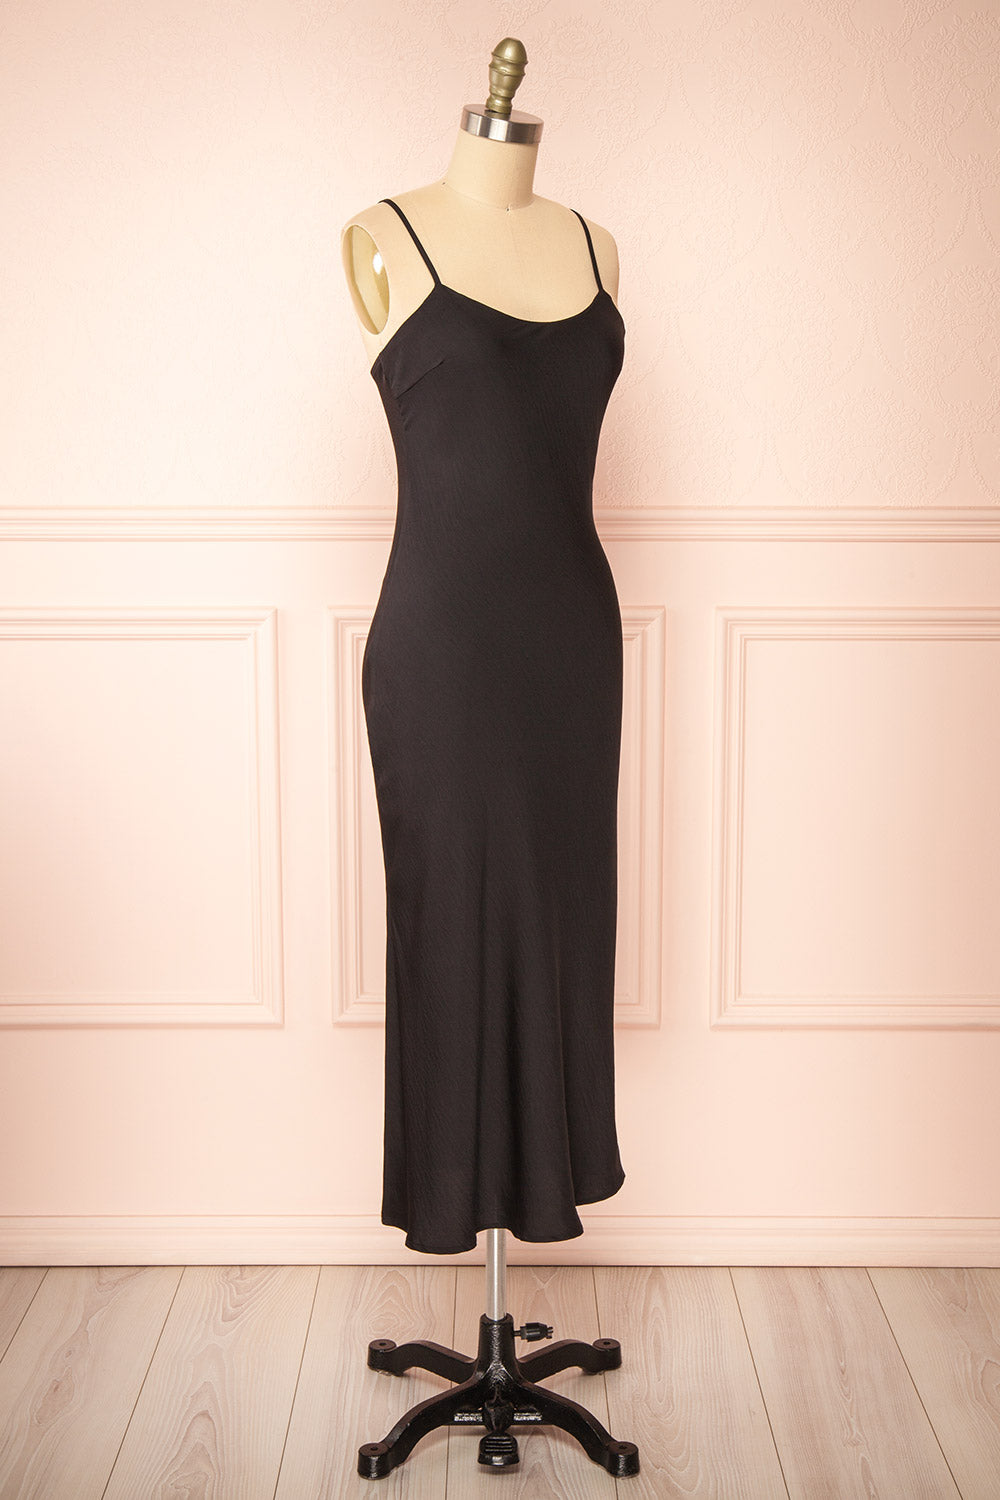 Rebby Black Silky Fitted Midi Dress | Boutique 1861 side view